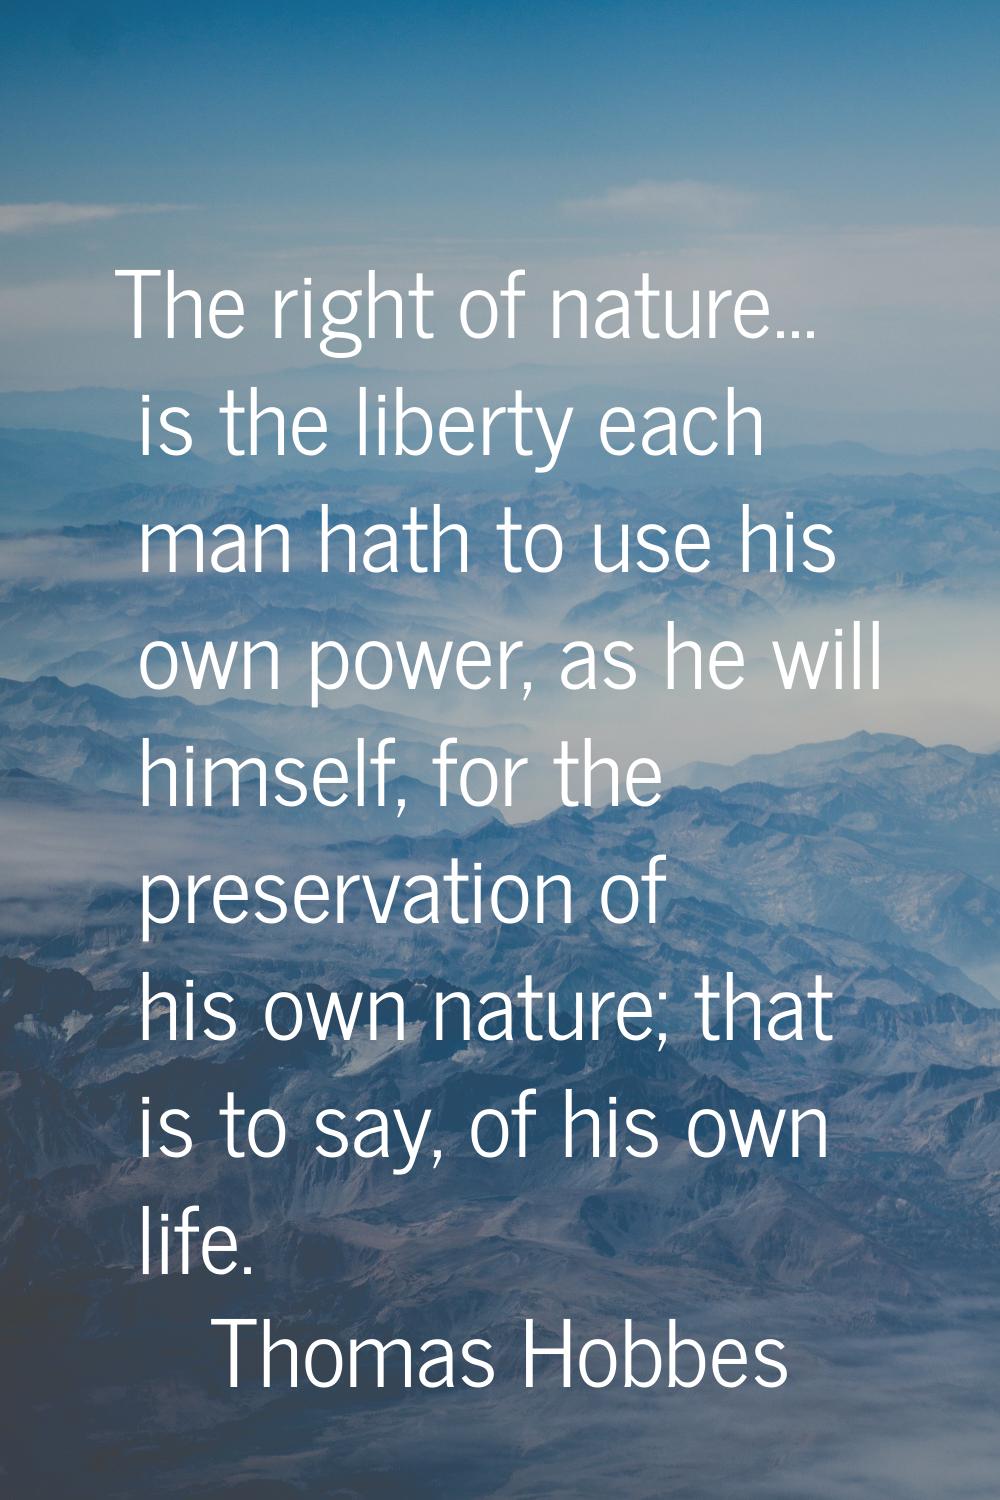 The right of nature... is the liberty each man hath to use his own power, as he will himself, for t